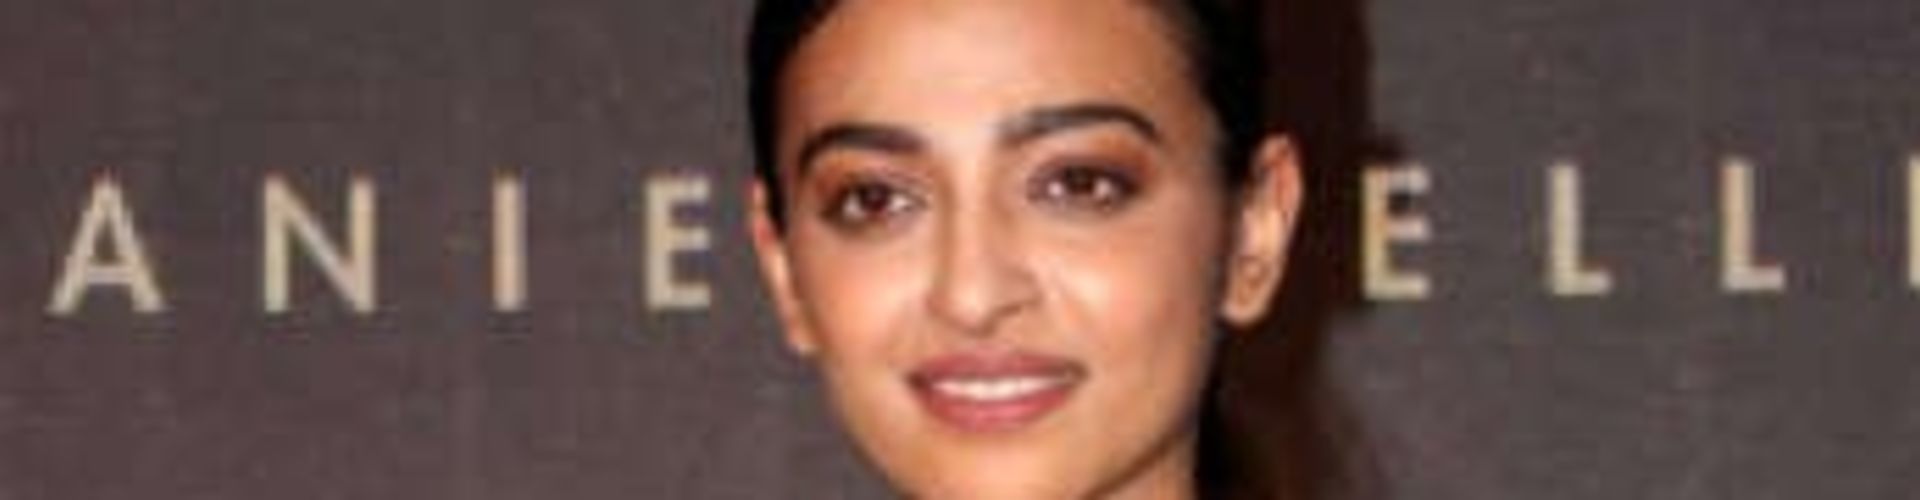 If you are influential it is important to know what you are promoting: Radhika Apte.